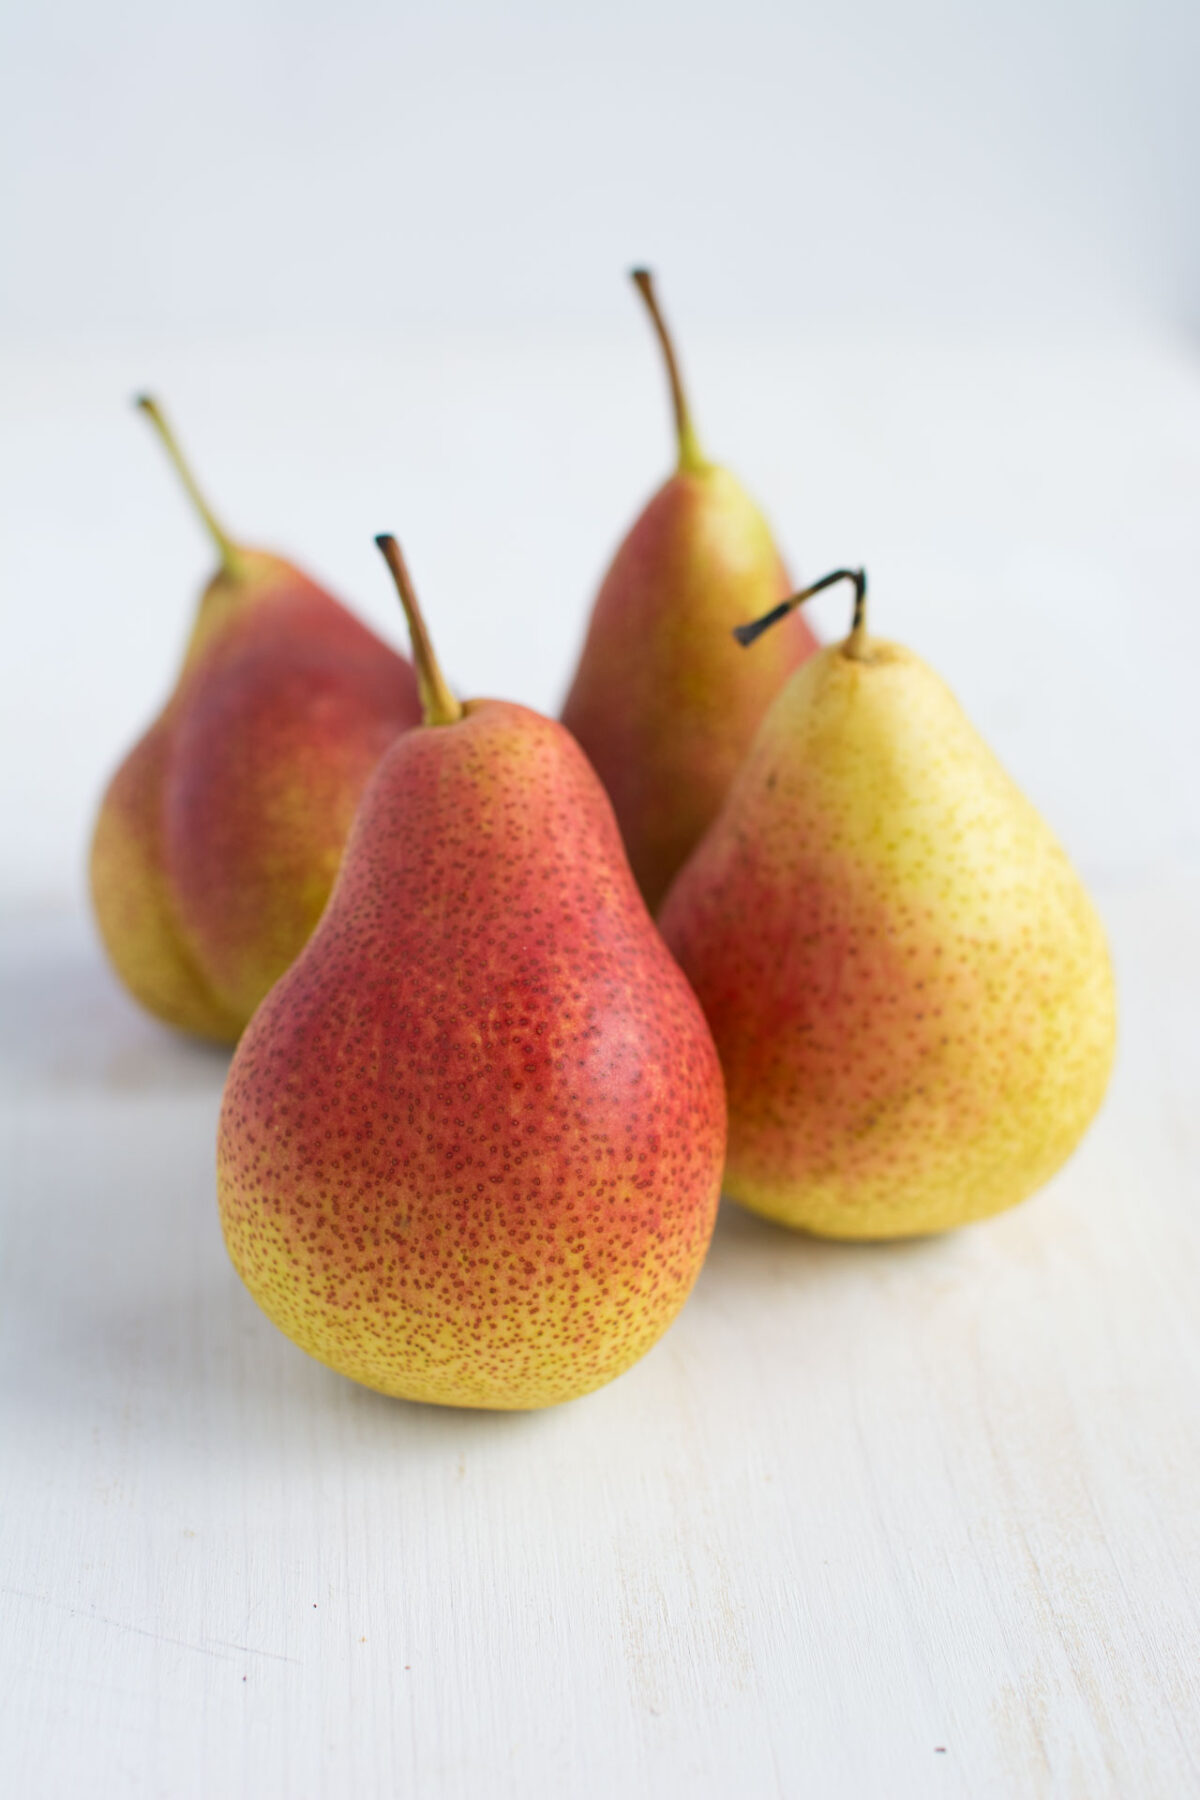 Four Forelle pears.